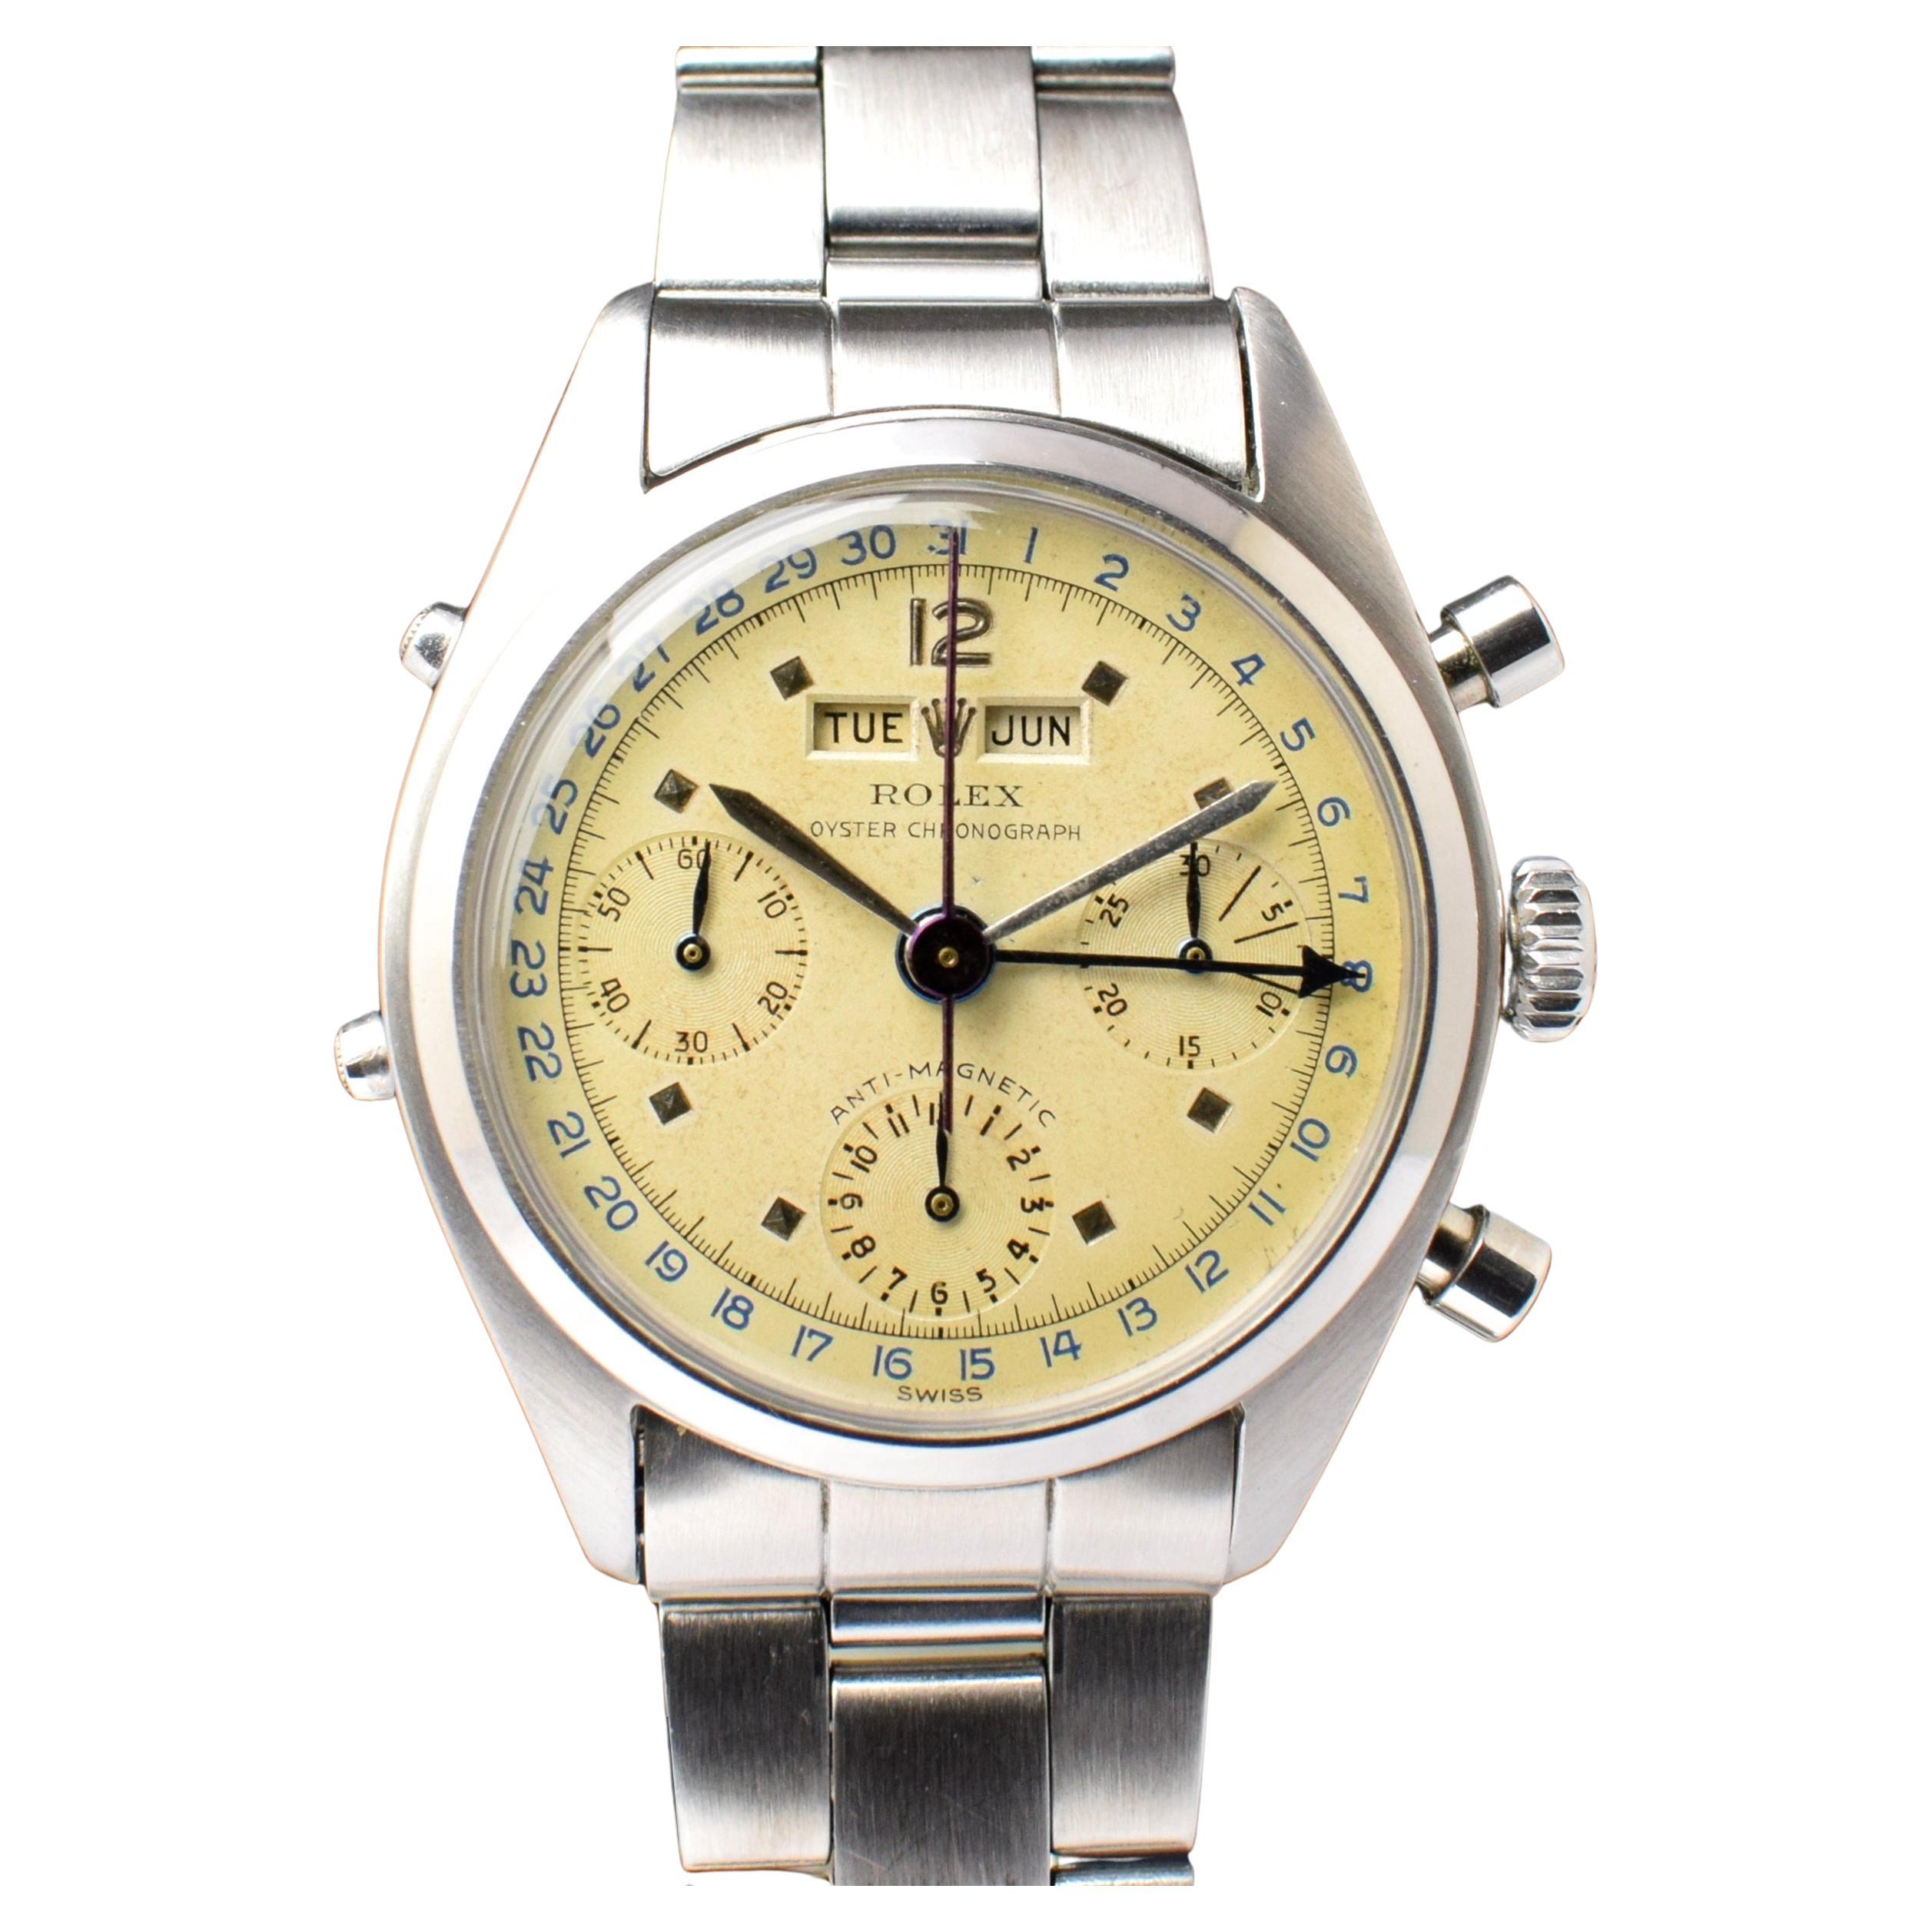 Jean Claude Killy Rolex - For Sale on 1stDibs